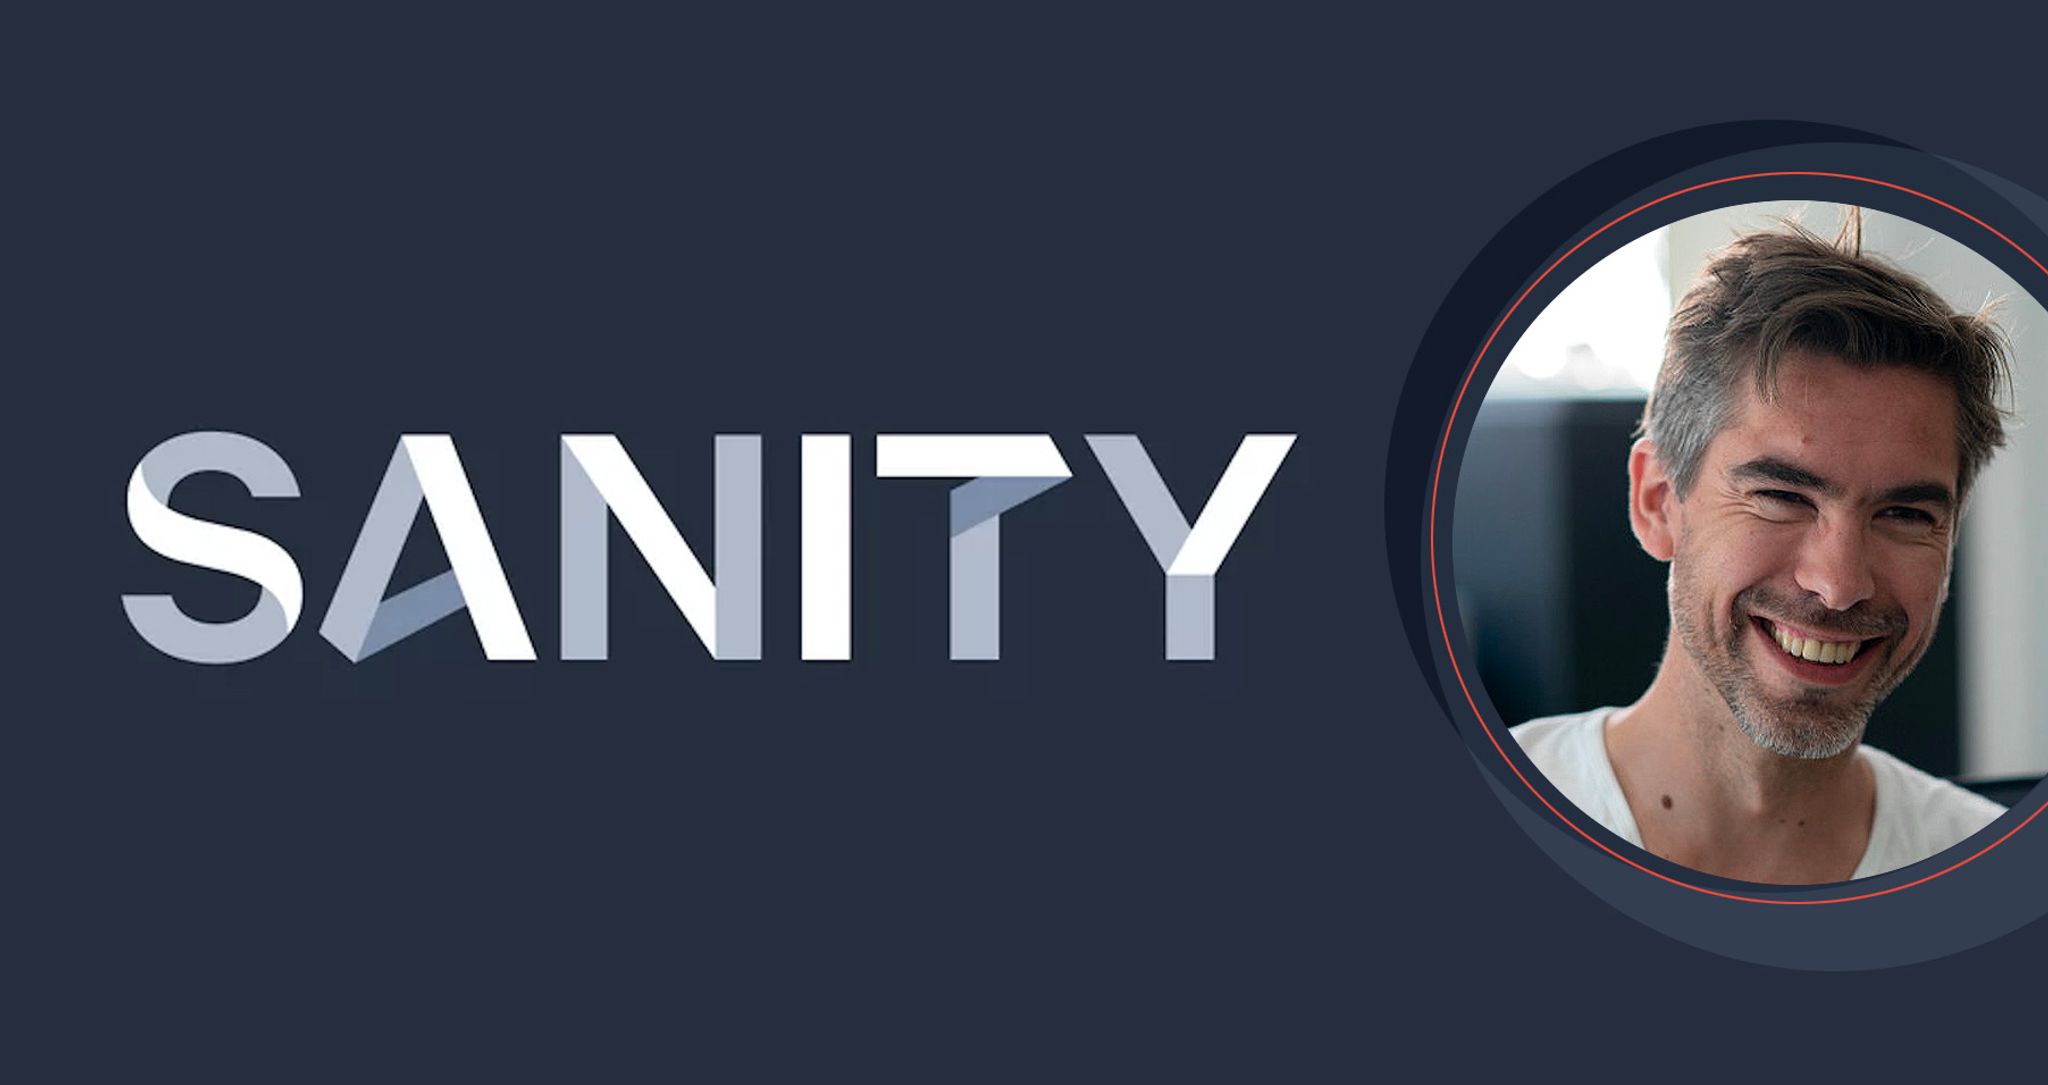 Sanity logo with image of CEO Magnus Hillstead